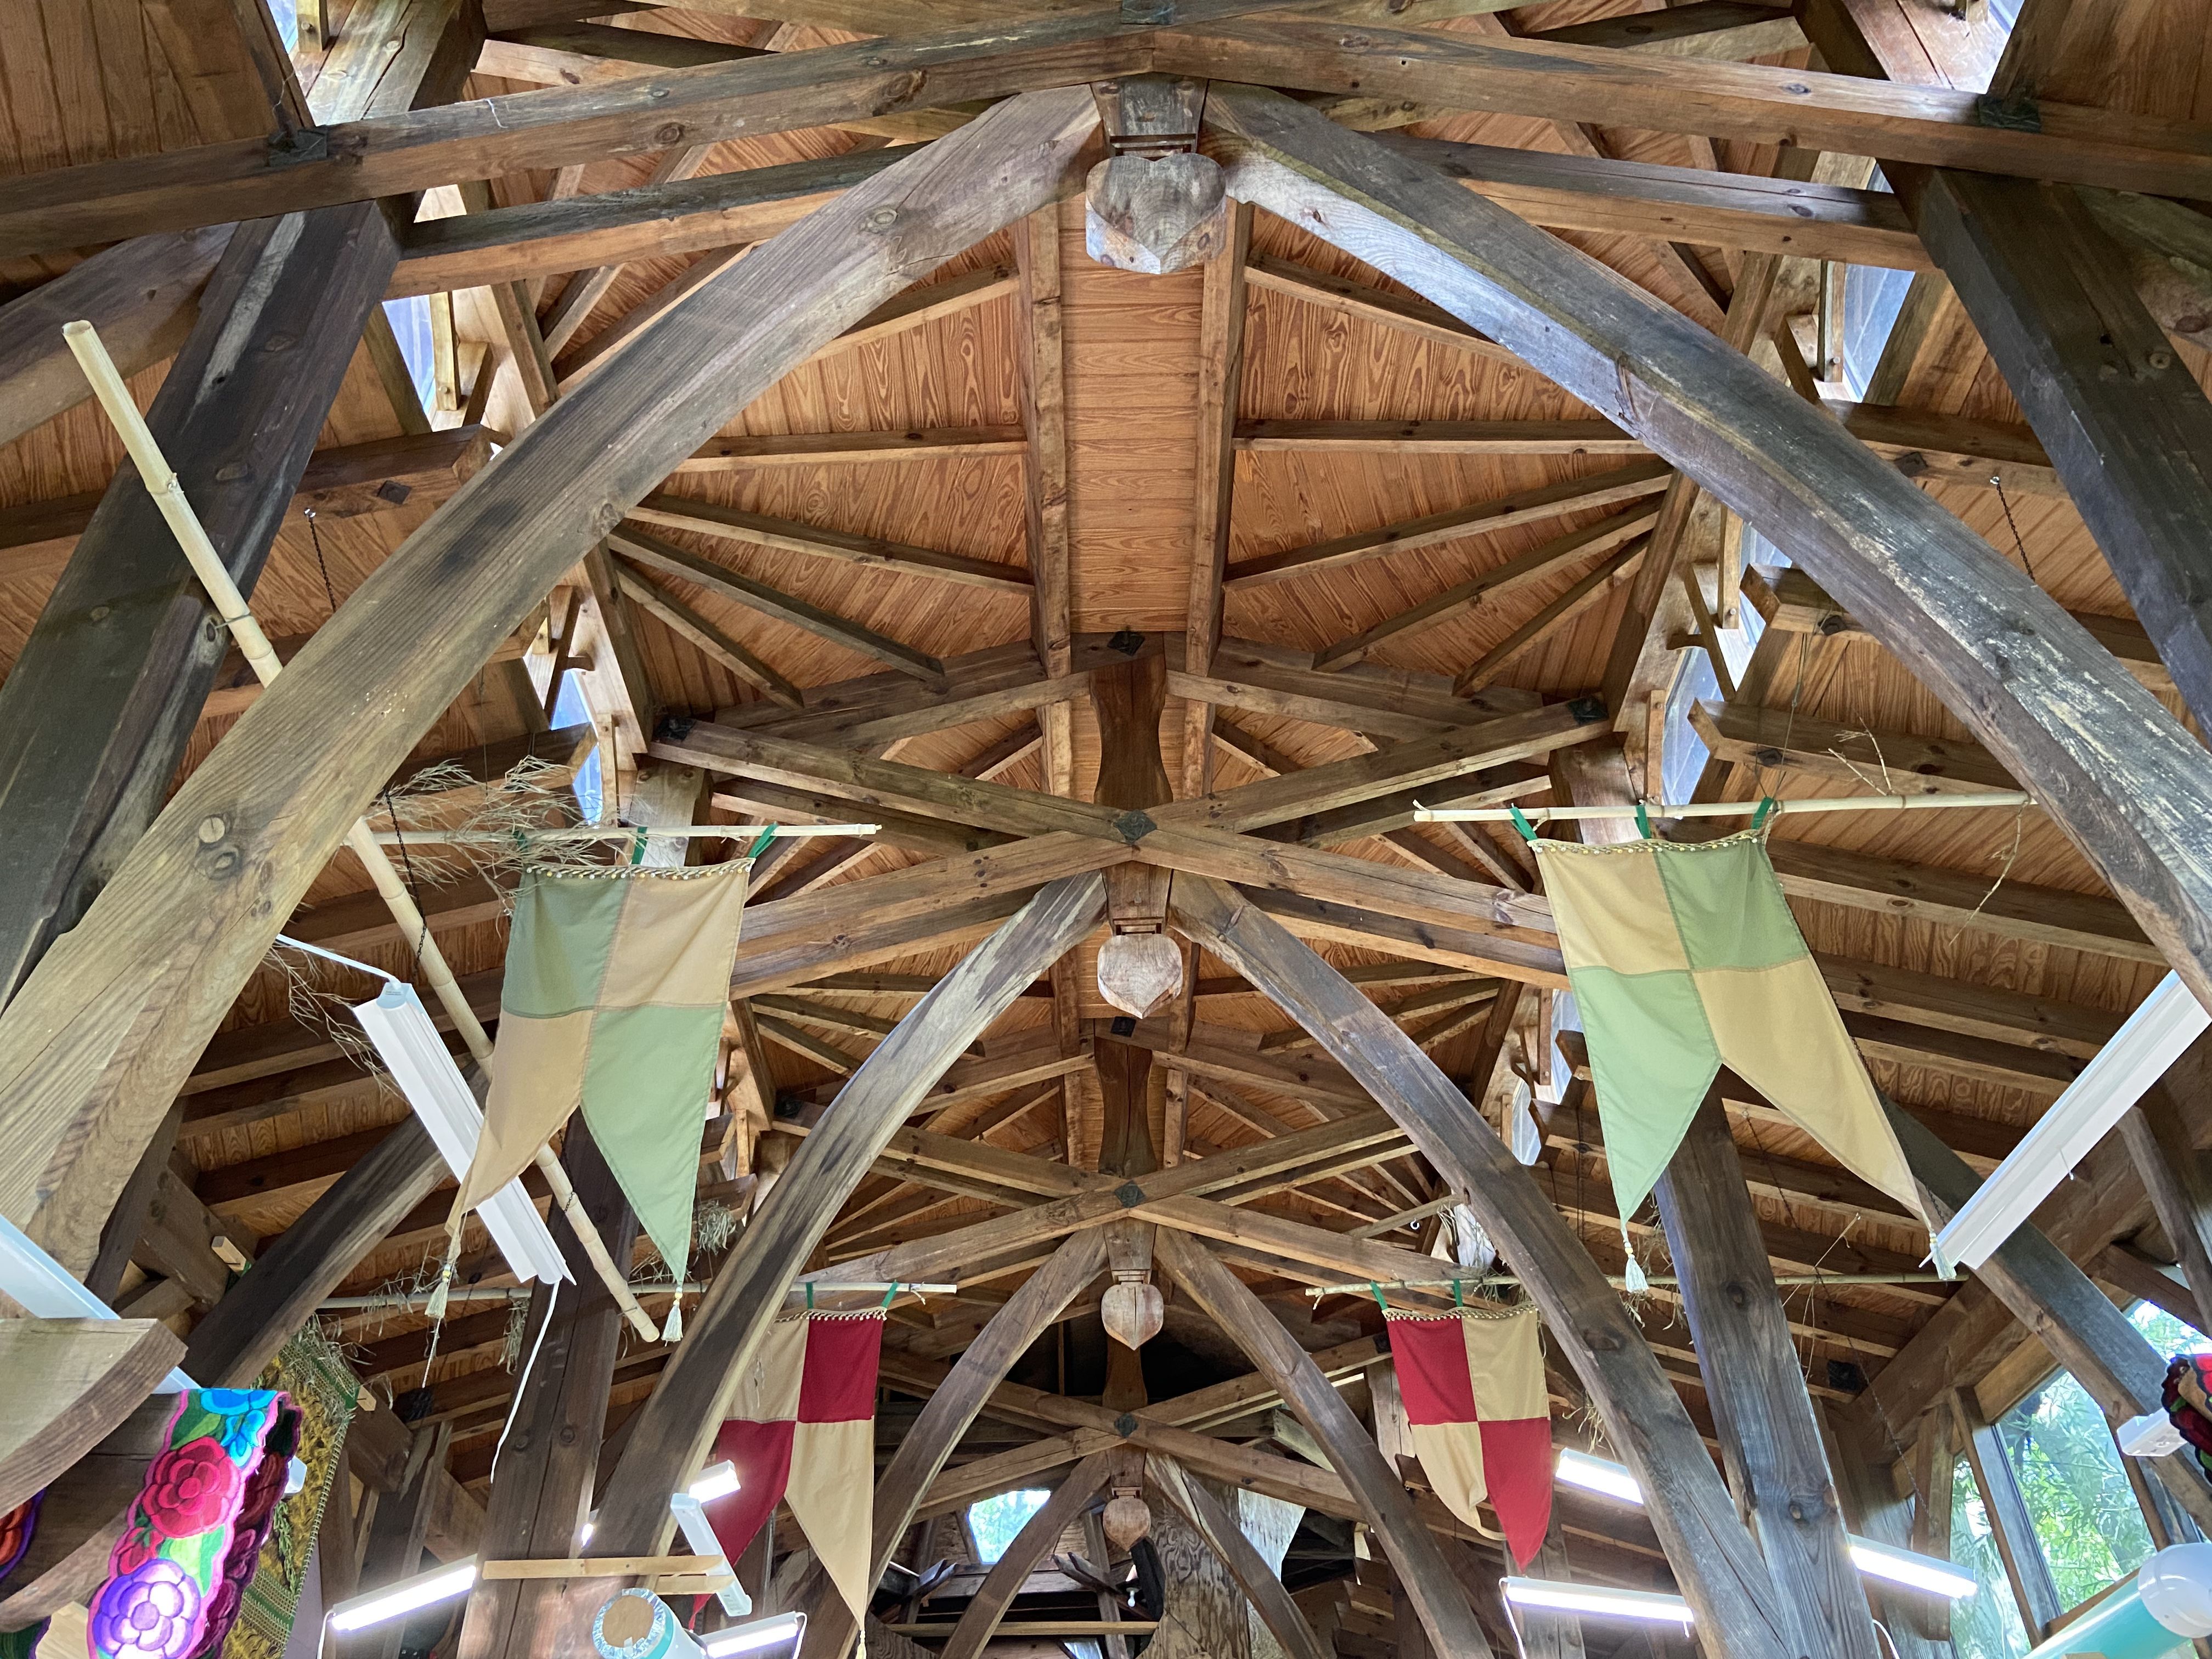 A photo looking up at a large medieval-like ceiling with flags